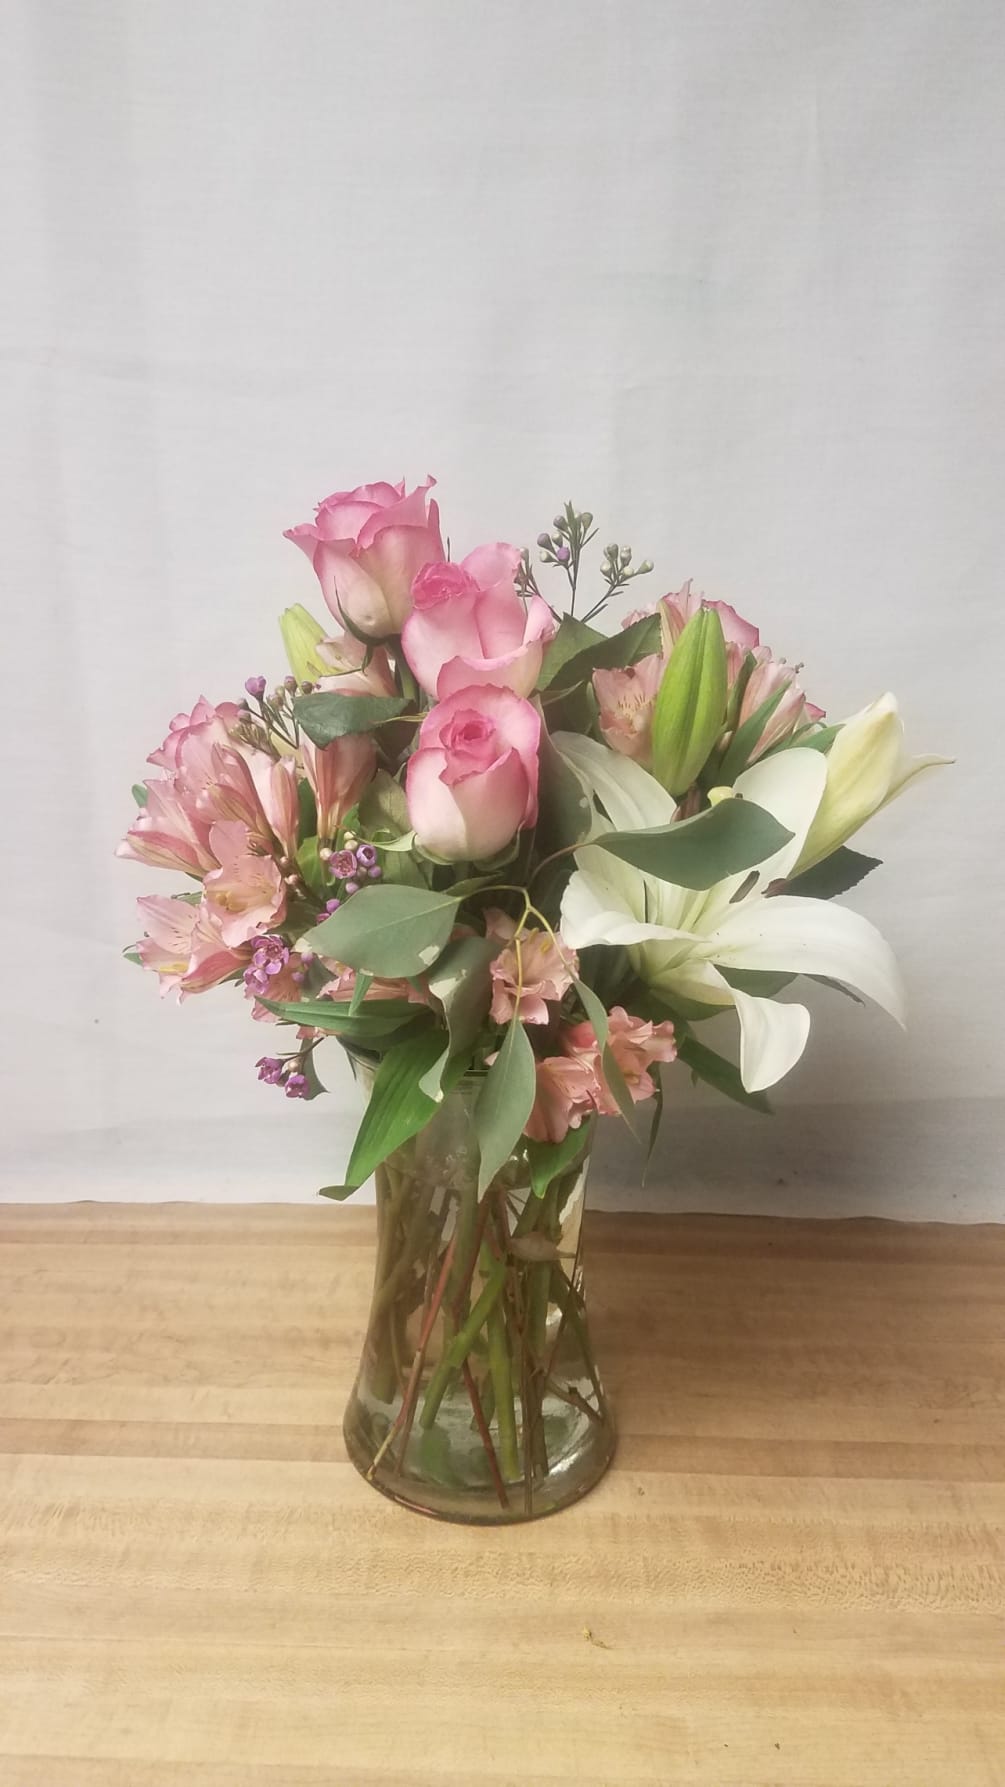 Perfect to let her know how much you appreciate her.  Flowers